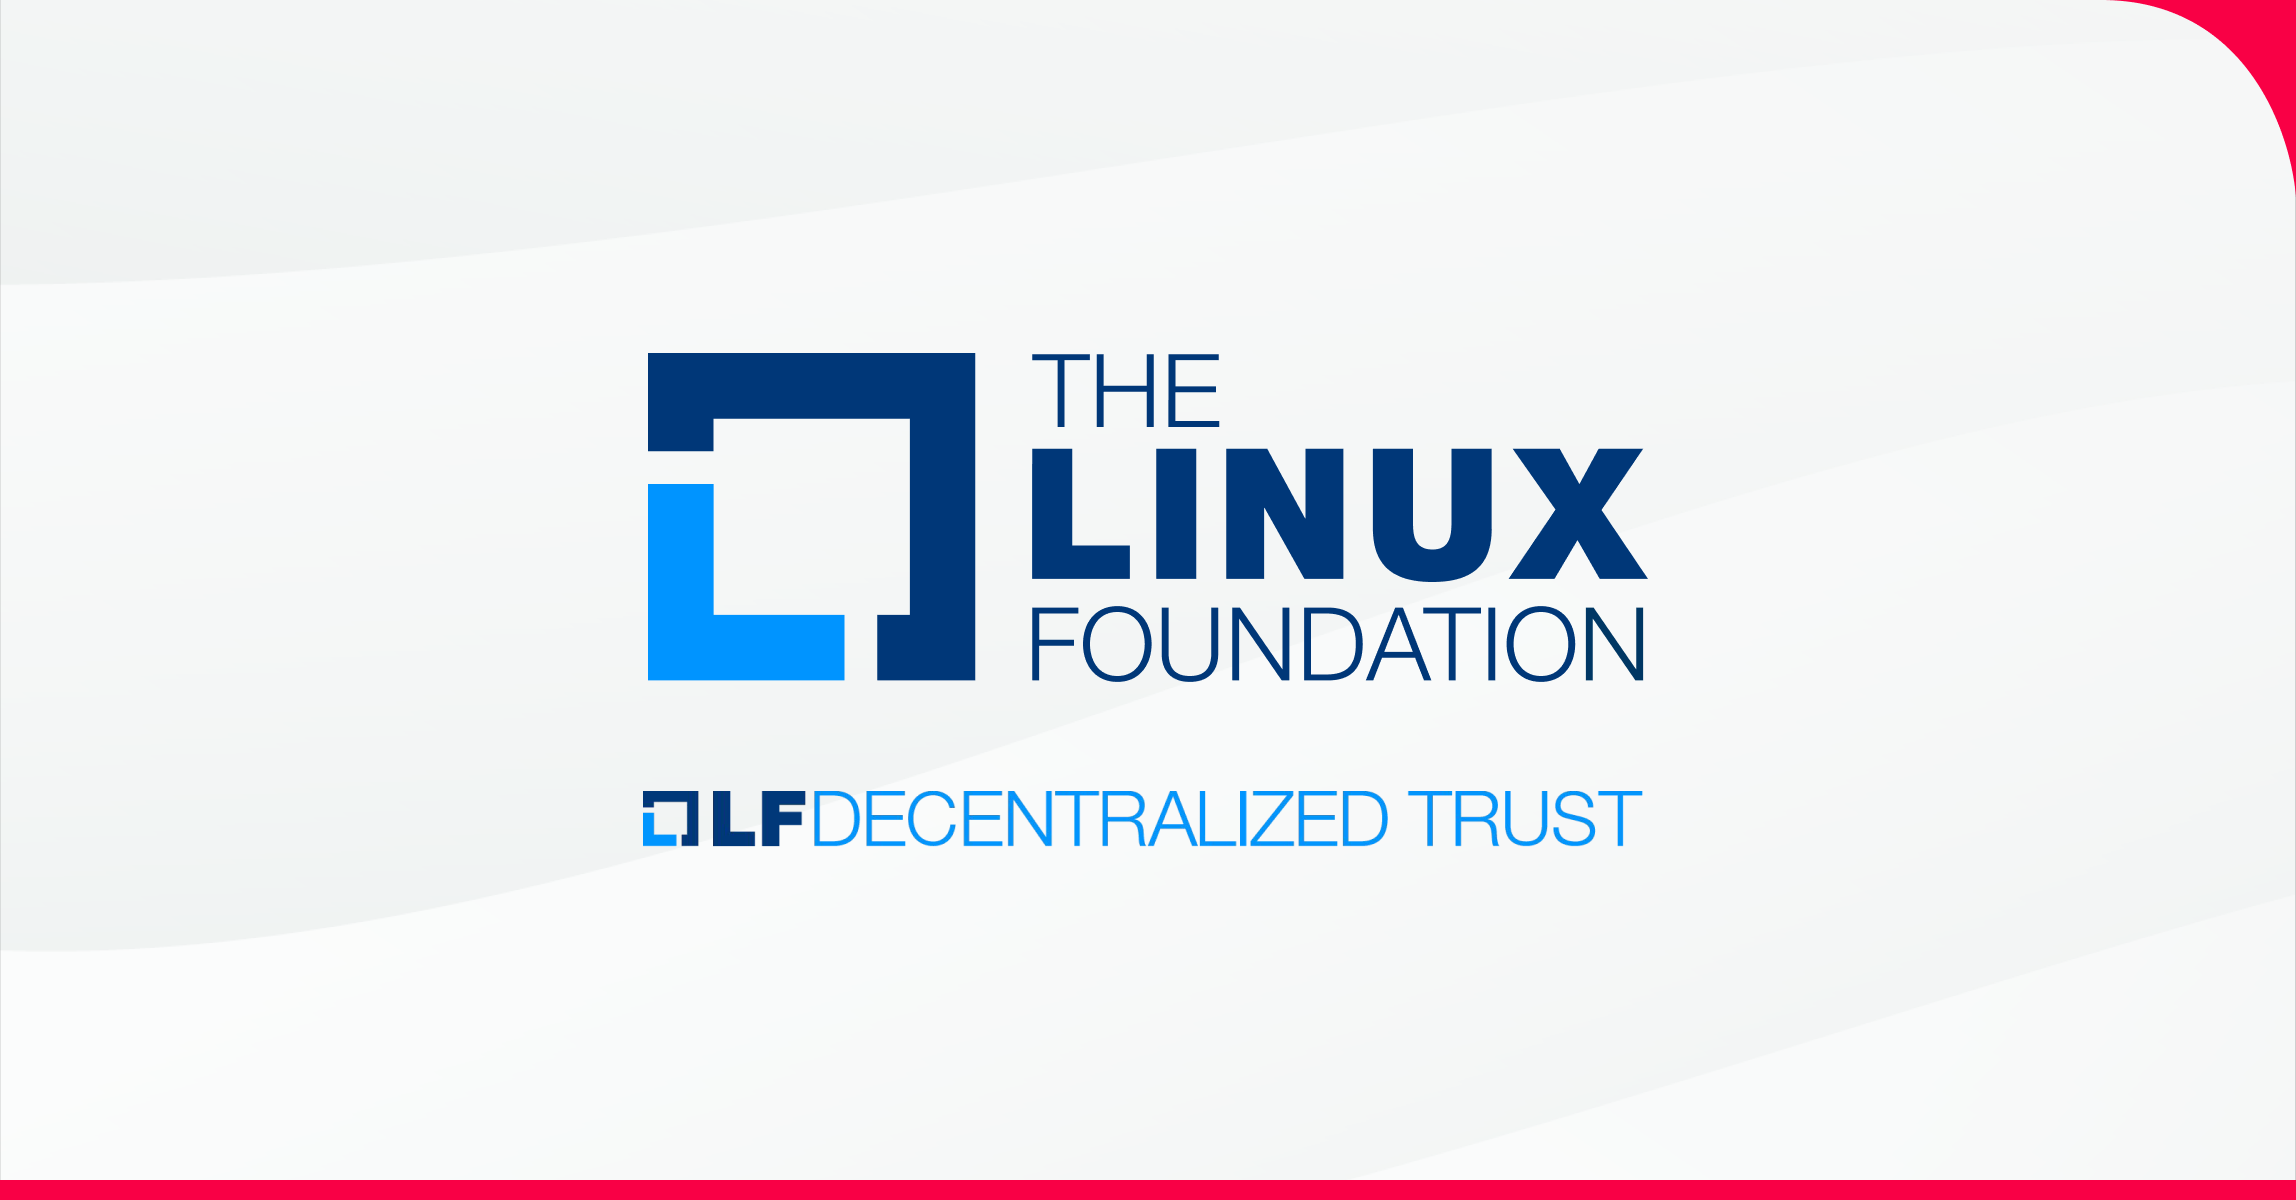 Logos of Espeo Software and The Linux Foundation with the text "LF Decentralized Trust".